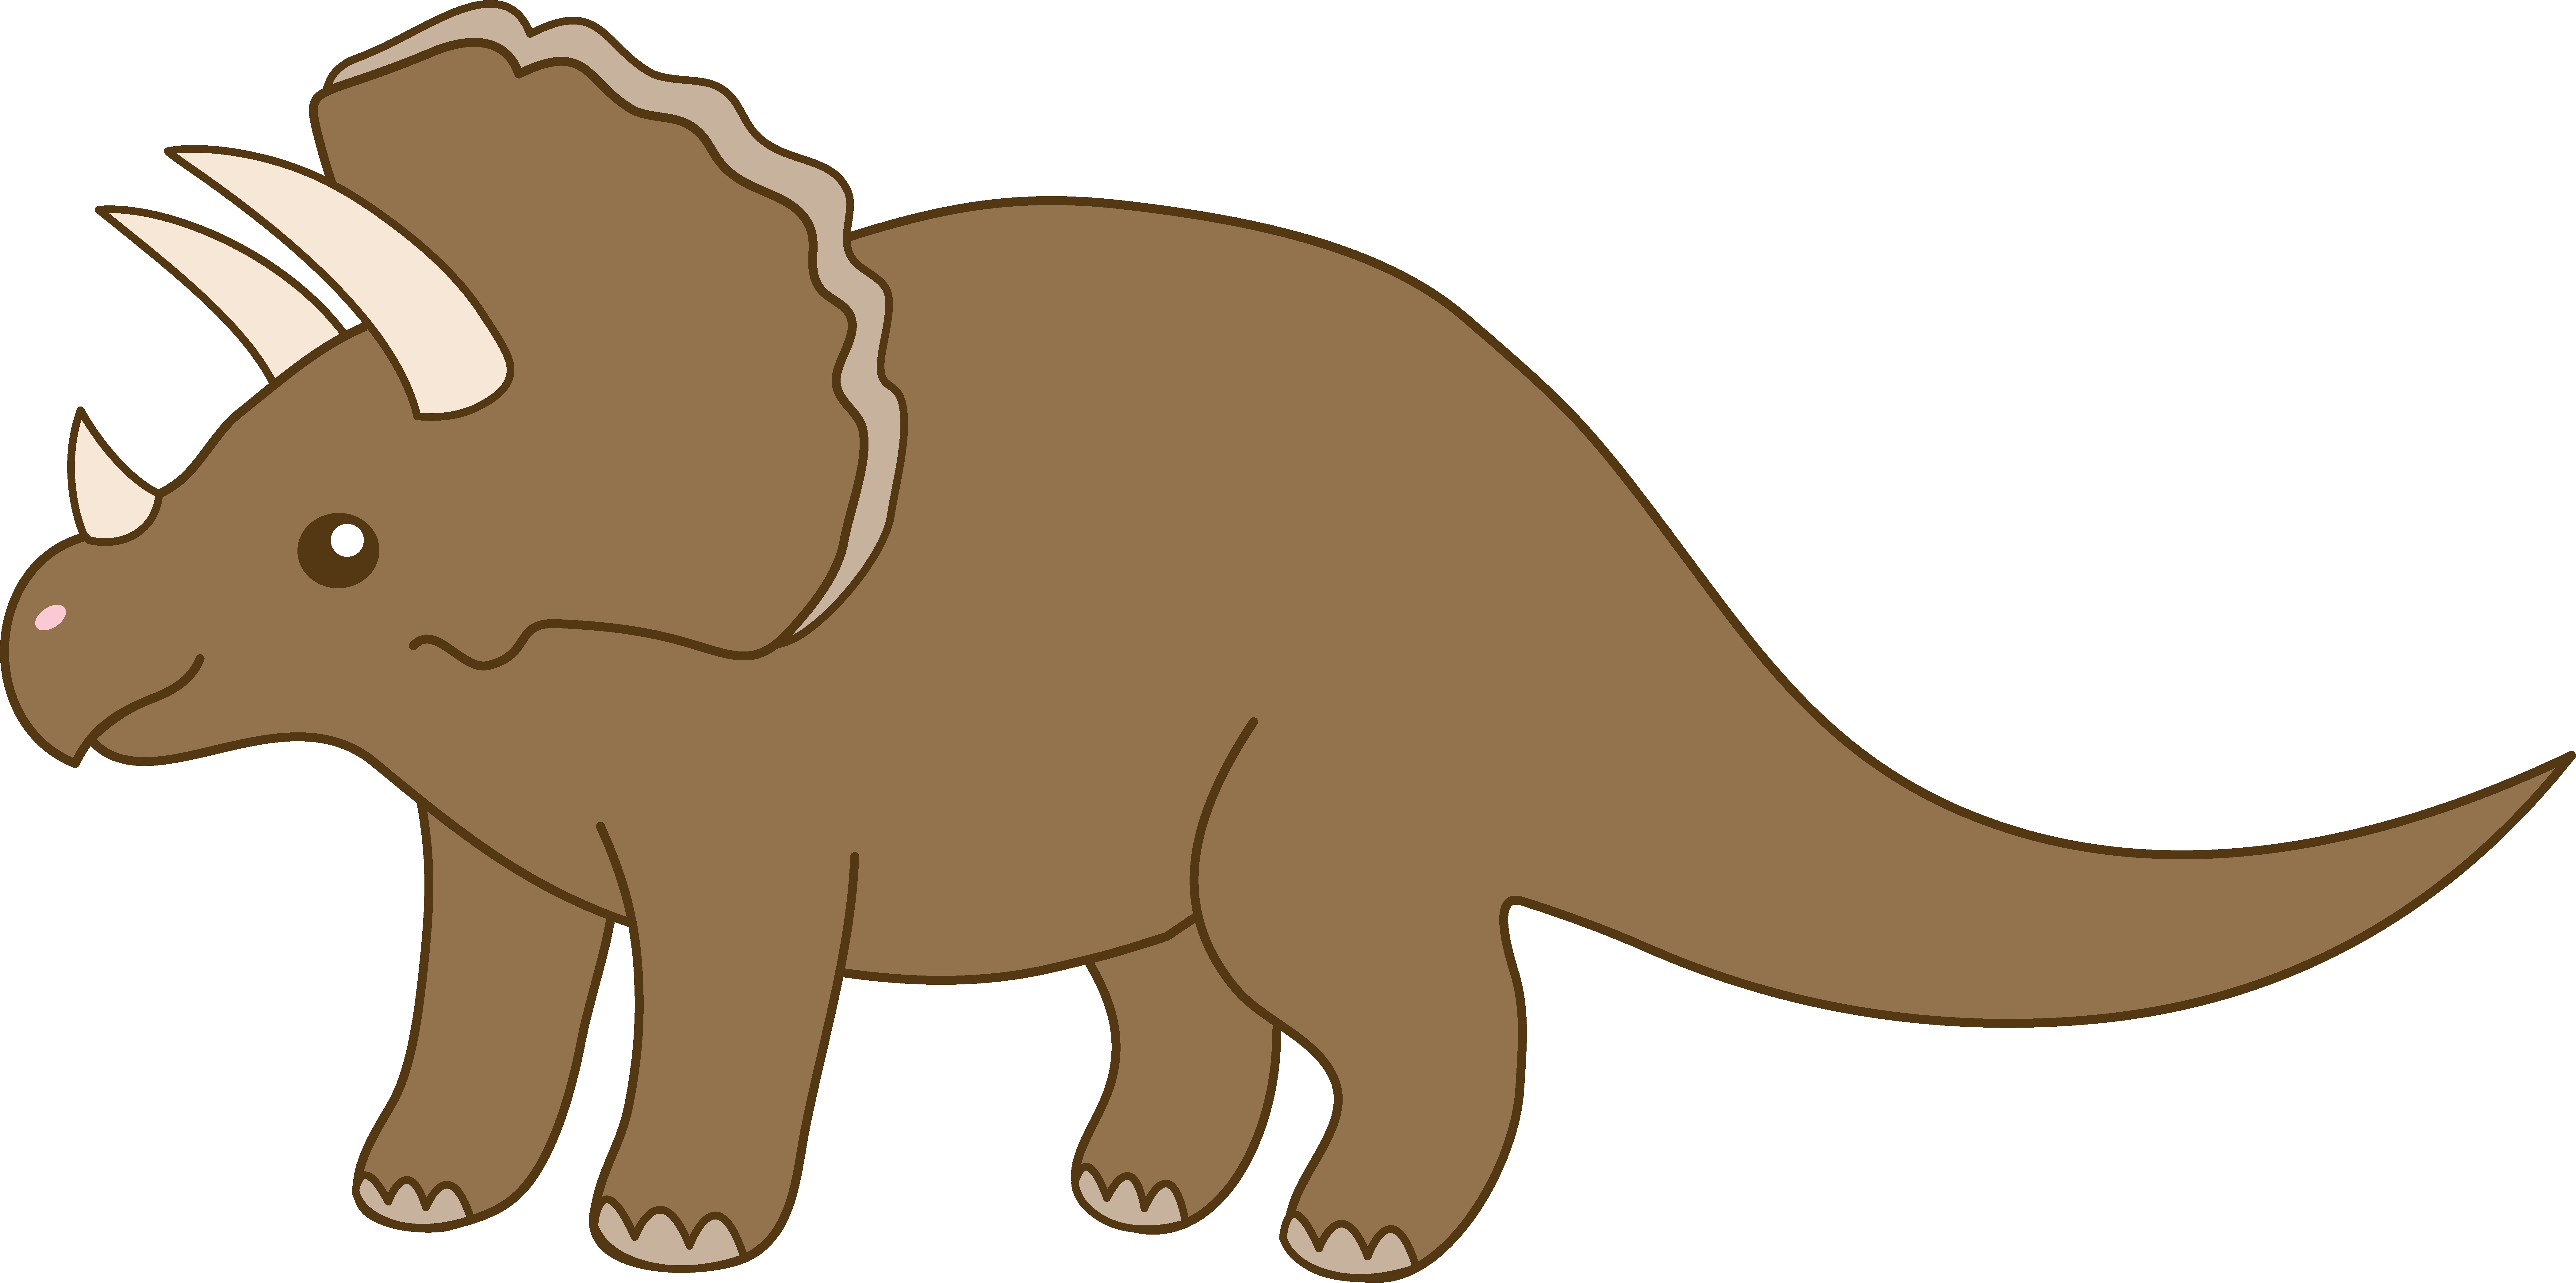 Images Of Cartoon Dinosaurs Cliparts.co